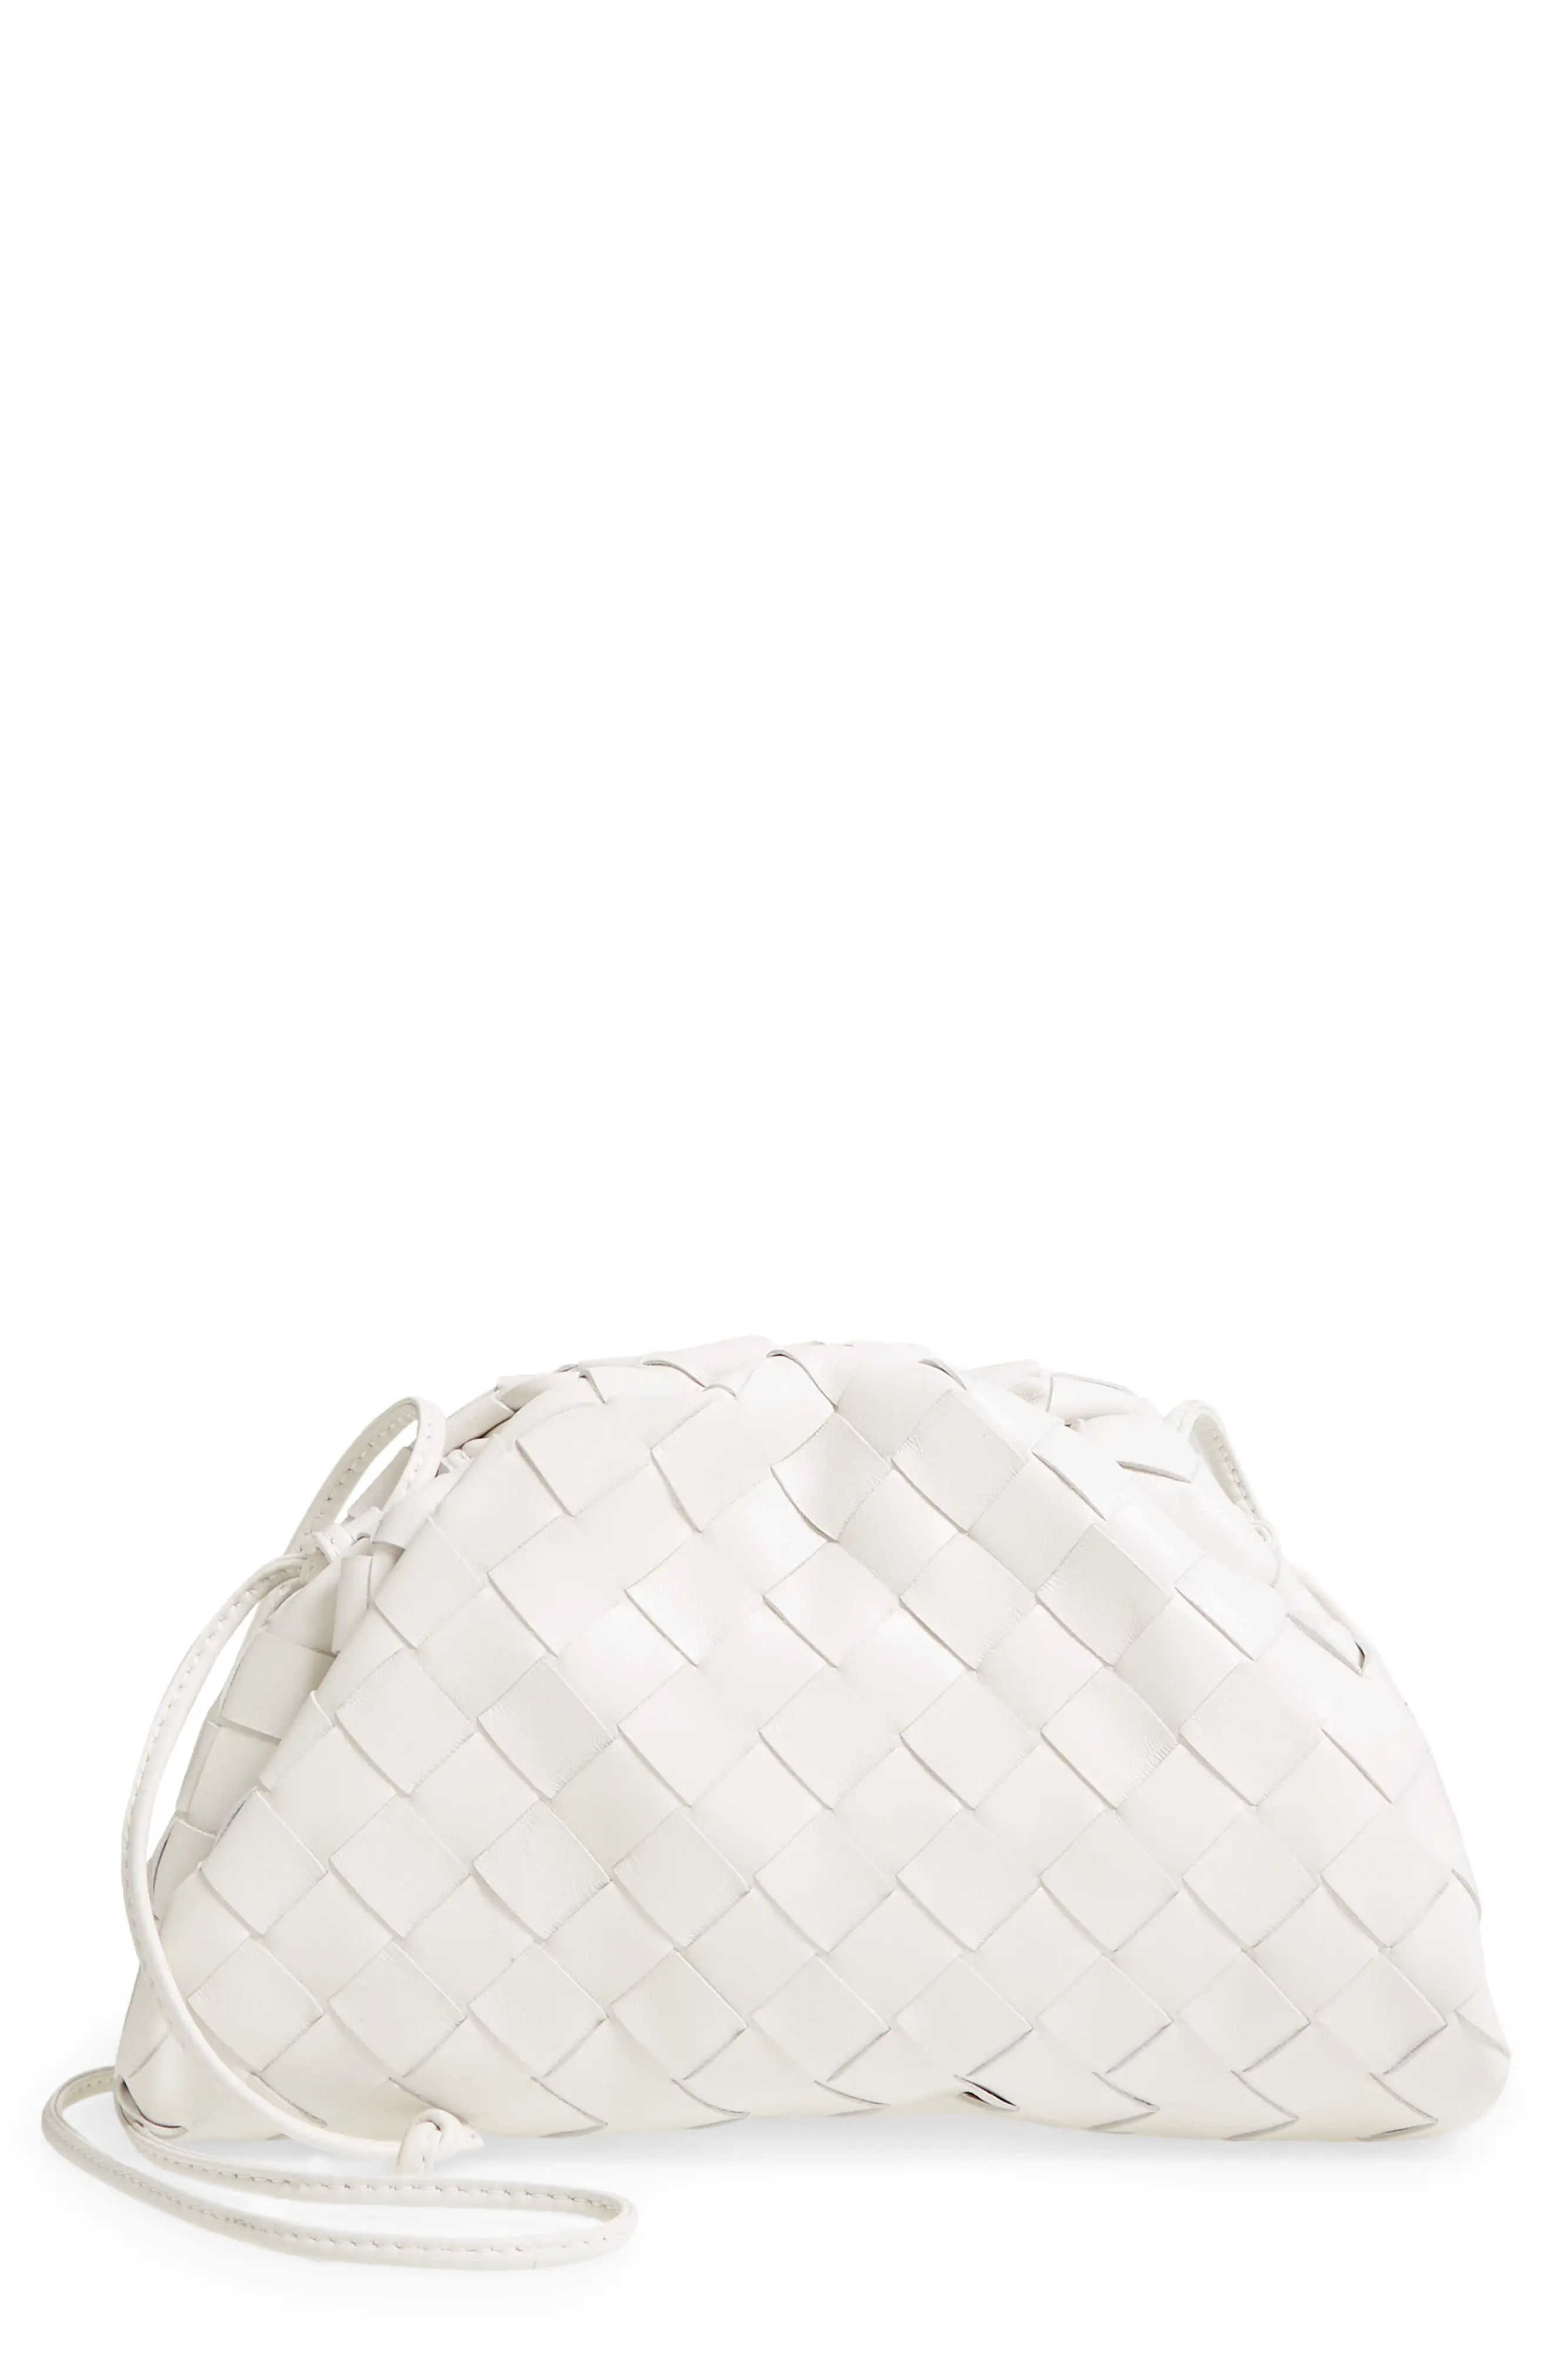 Bottega Veneta Small The Pouch Leather Clutch in Chalk-Gold at Nordstrom | Nordstrom